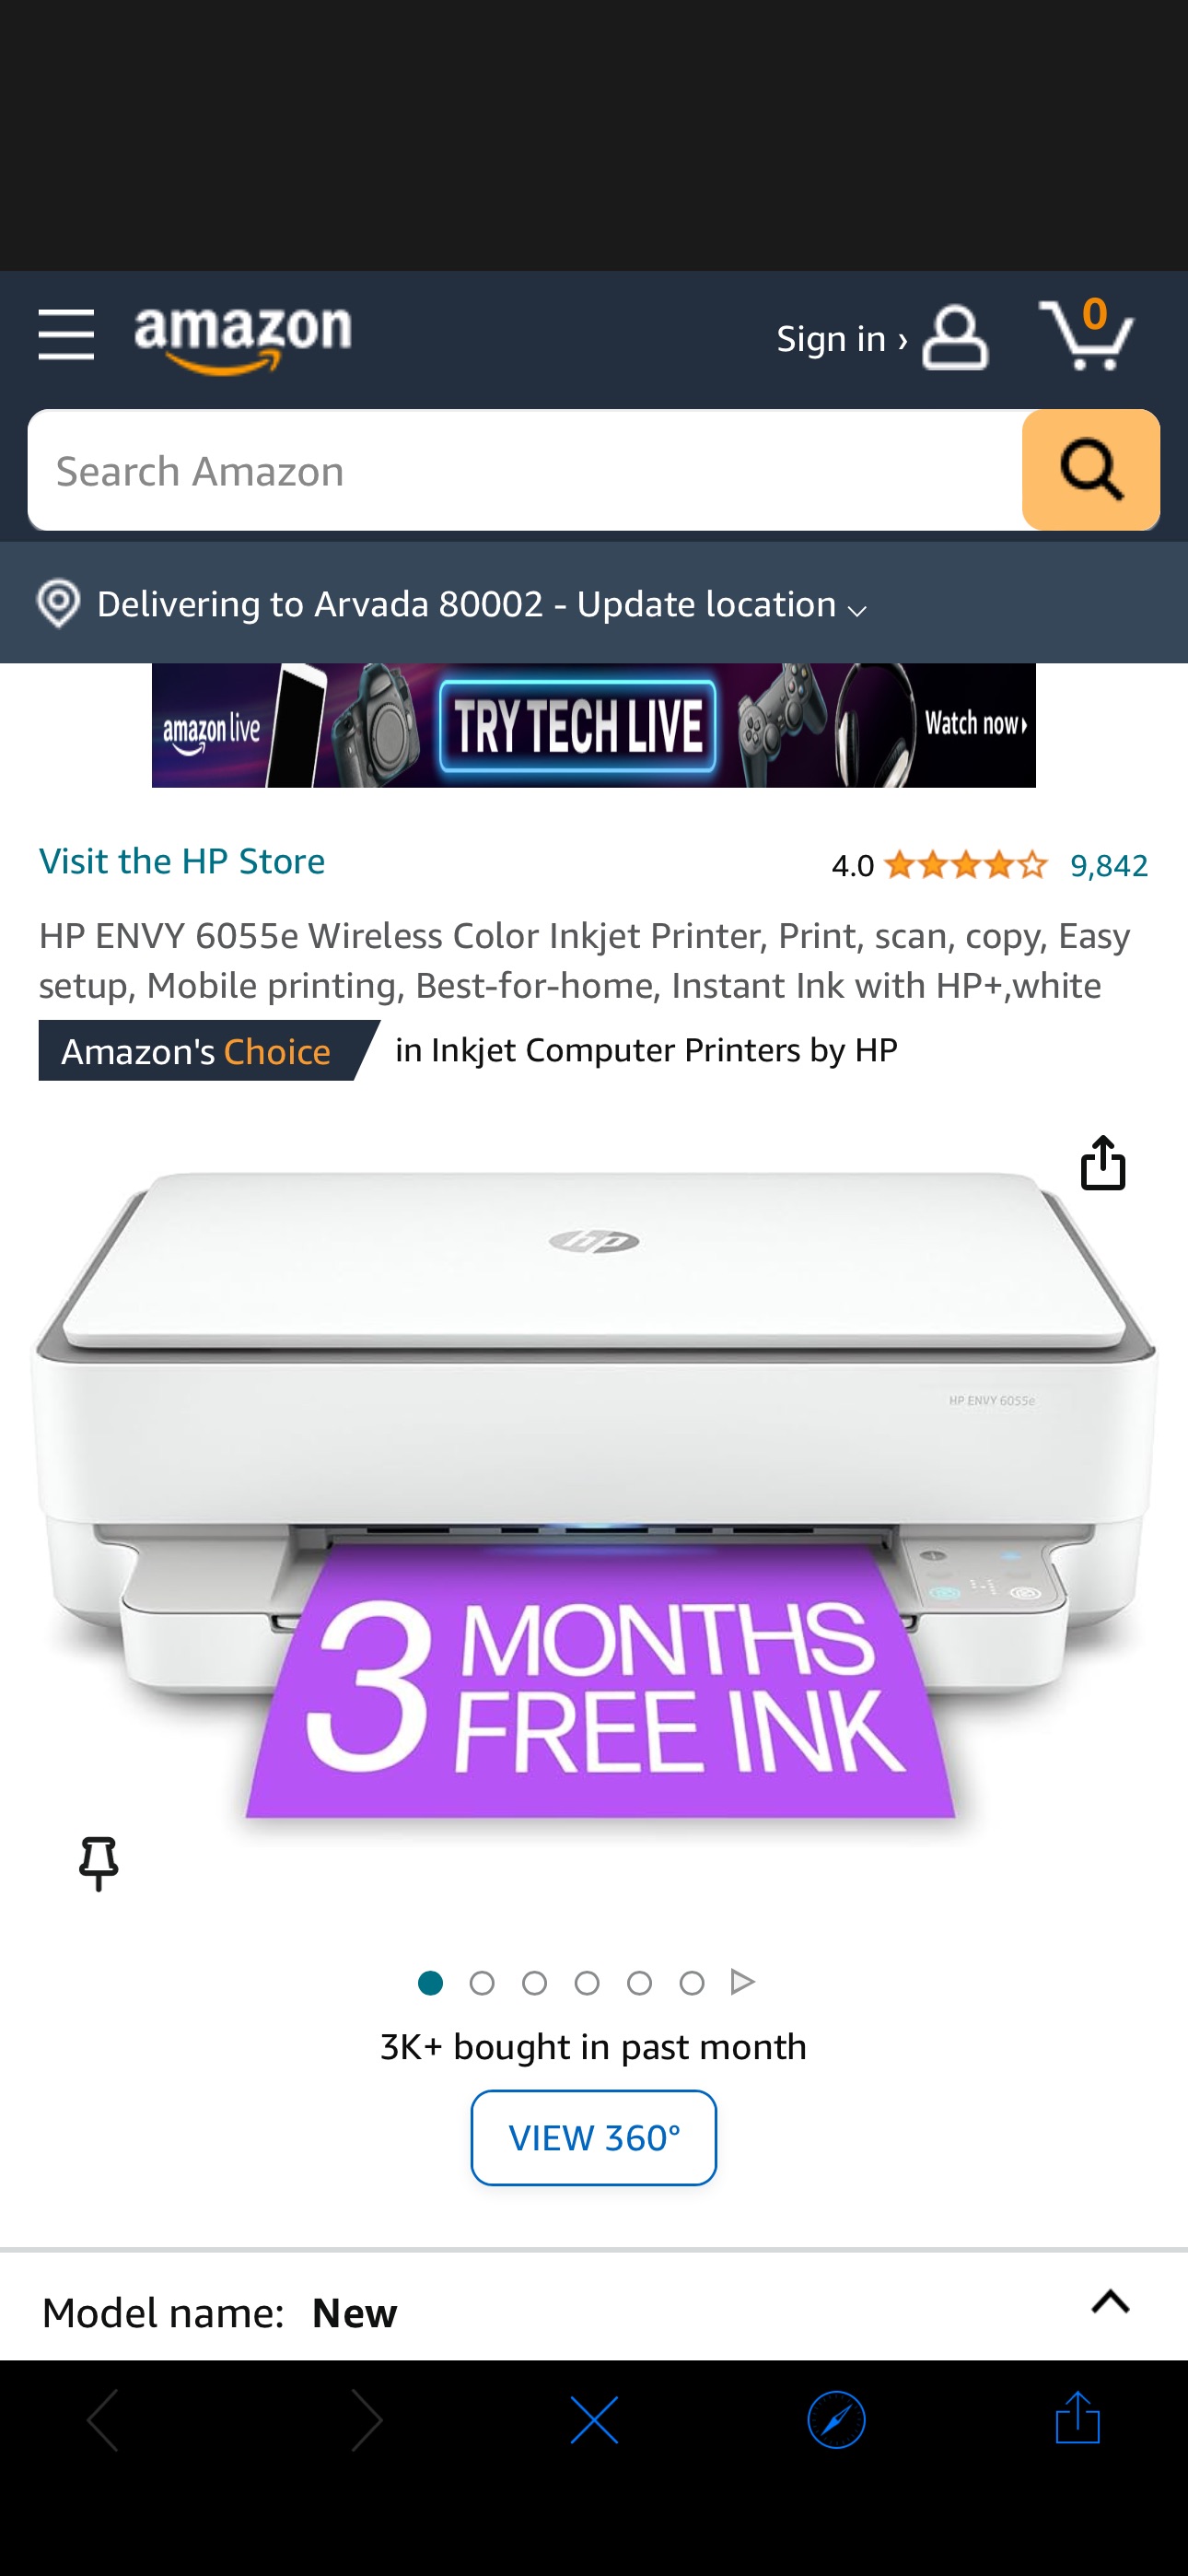 Amazon.com: HP ENVY 6055e Wireless Color Inkjet Printer, Print, scan, copy, Easy setup, Mobile printing, Best-for-home, Instant Ink with HP+,white : Office Products